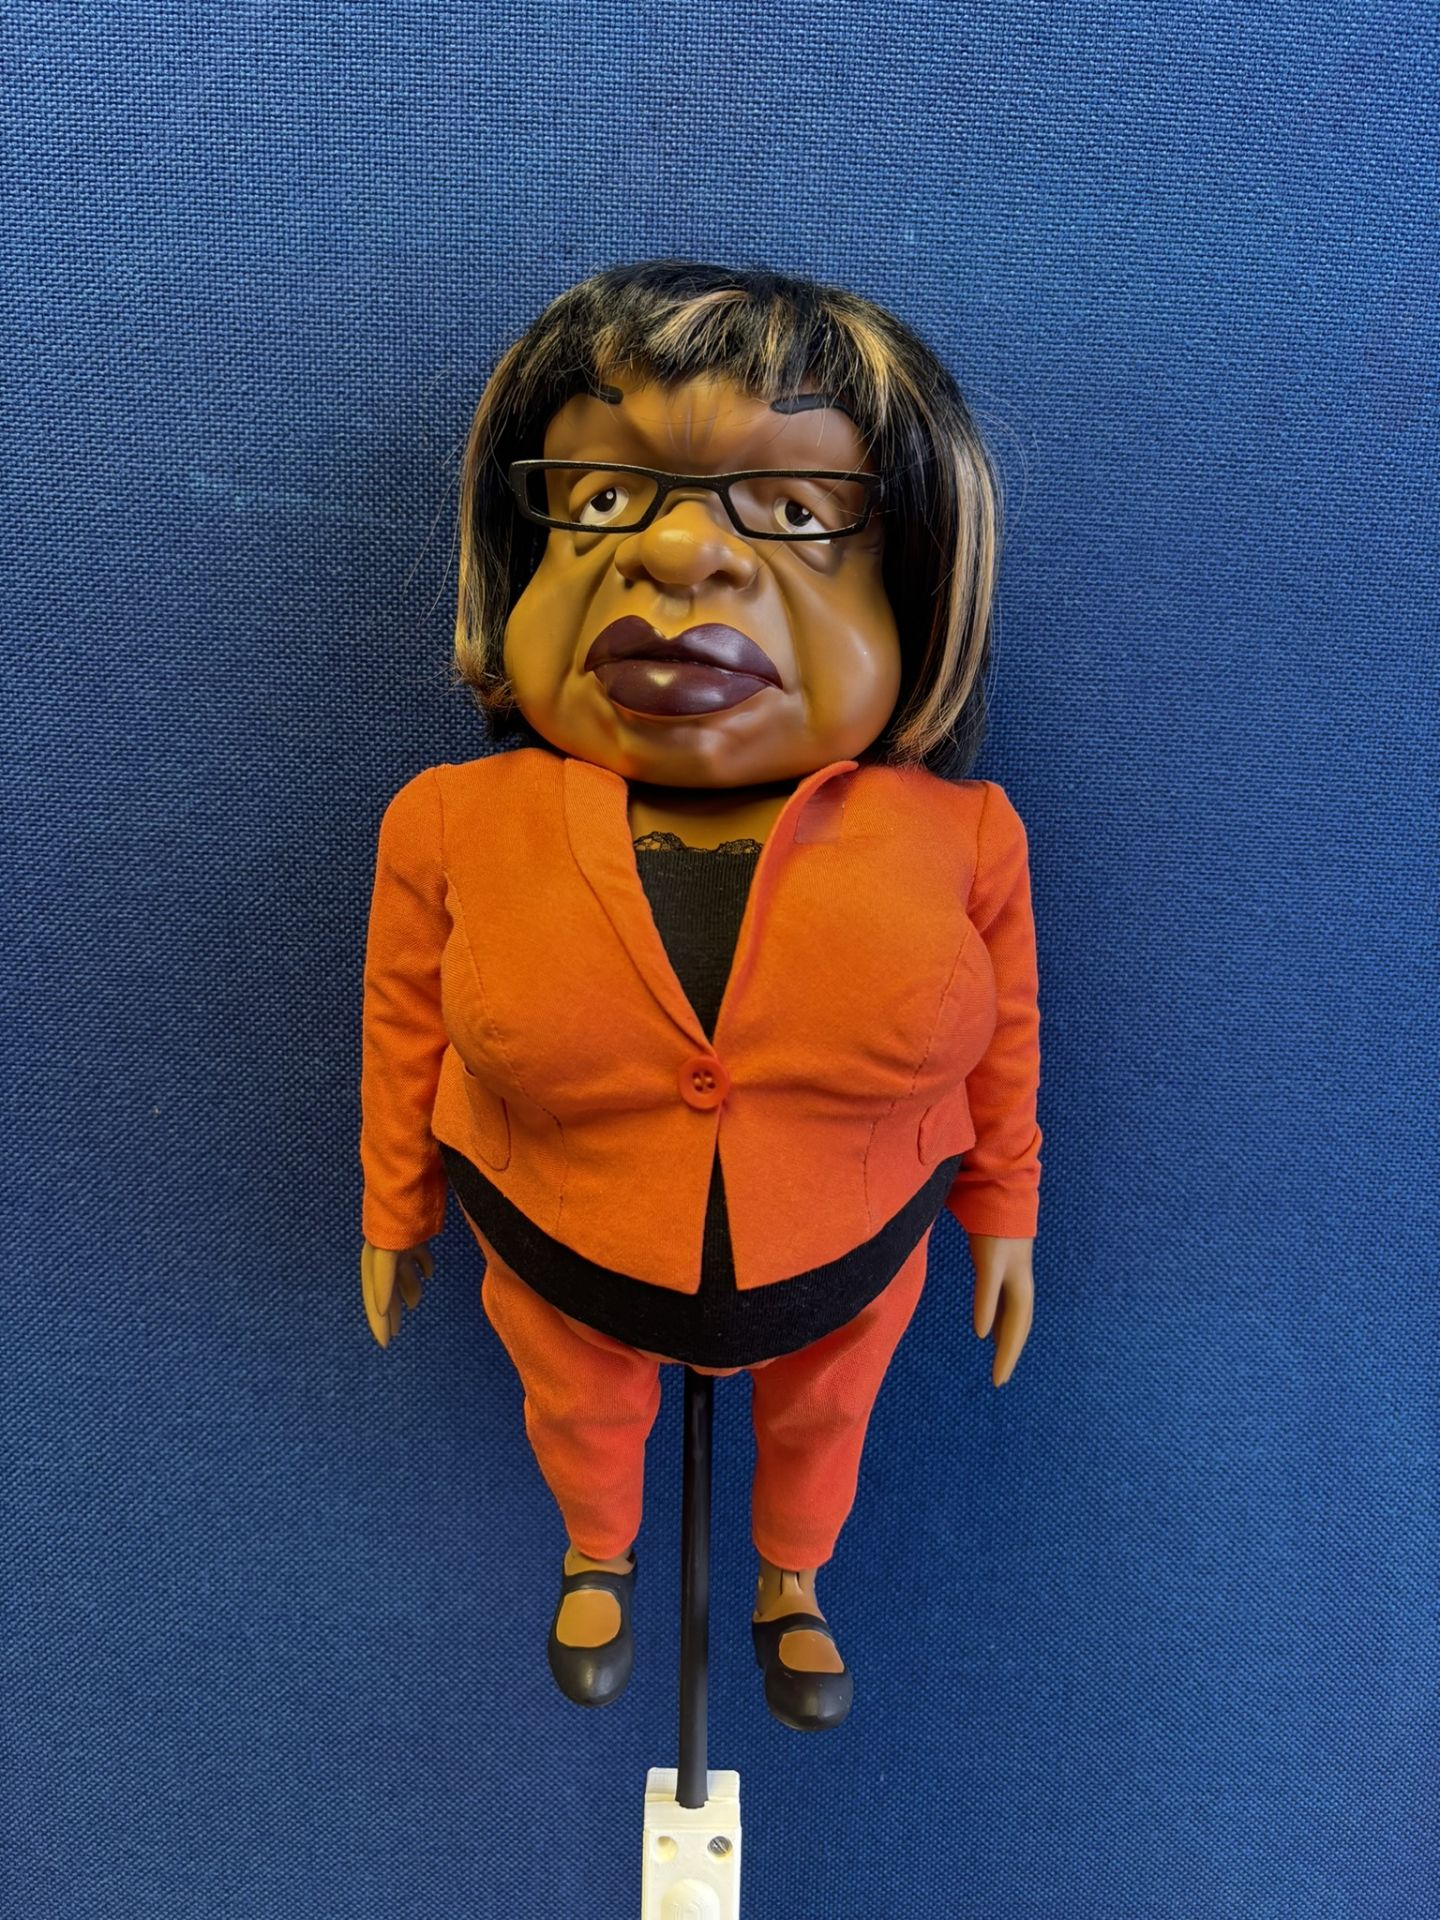 Newzoid puppet - Diane Abbot - Image 2 of 3